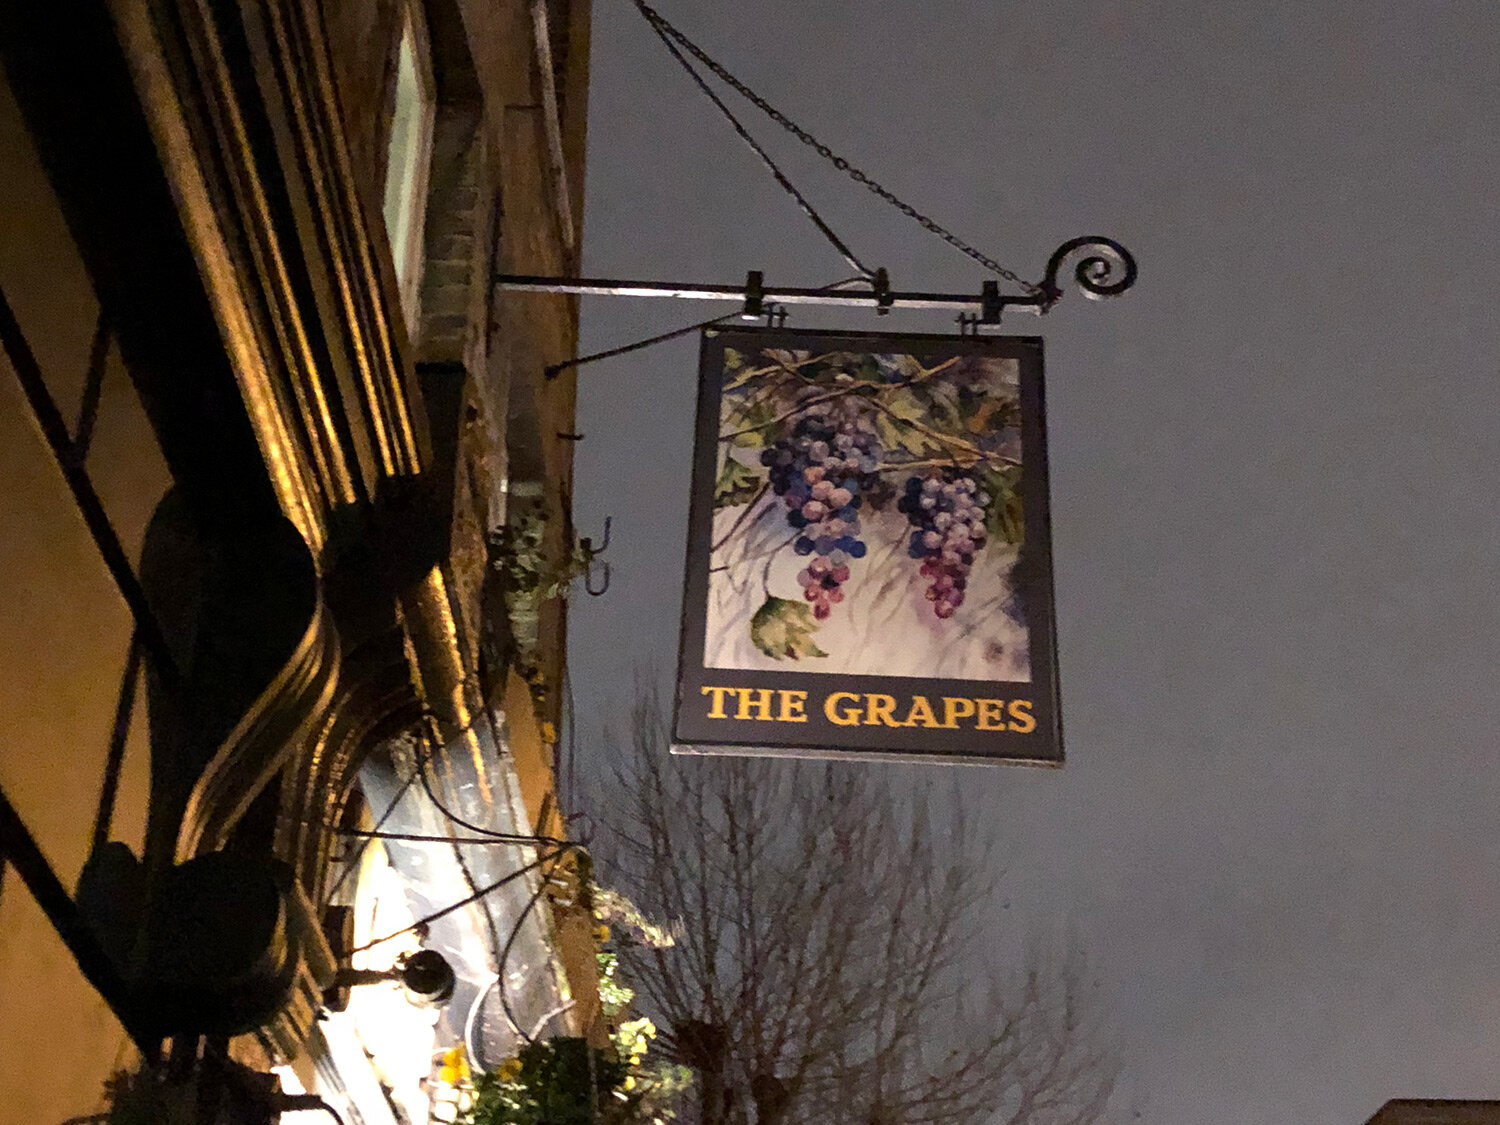  Dinner at The Grapes with Sir Ian McKellen 